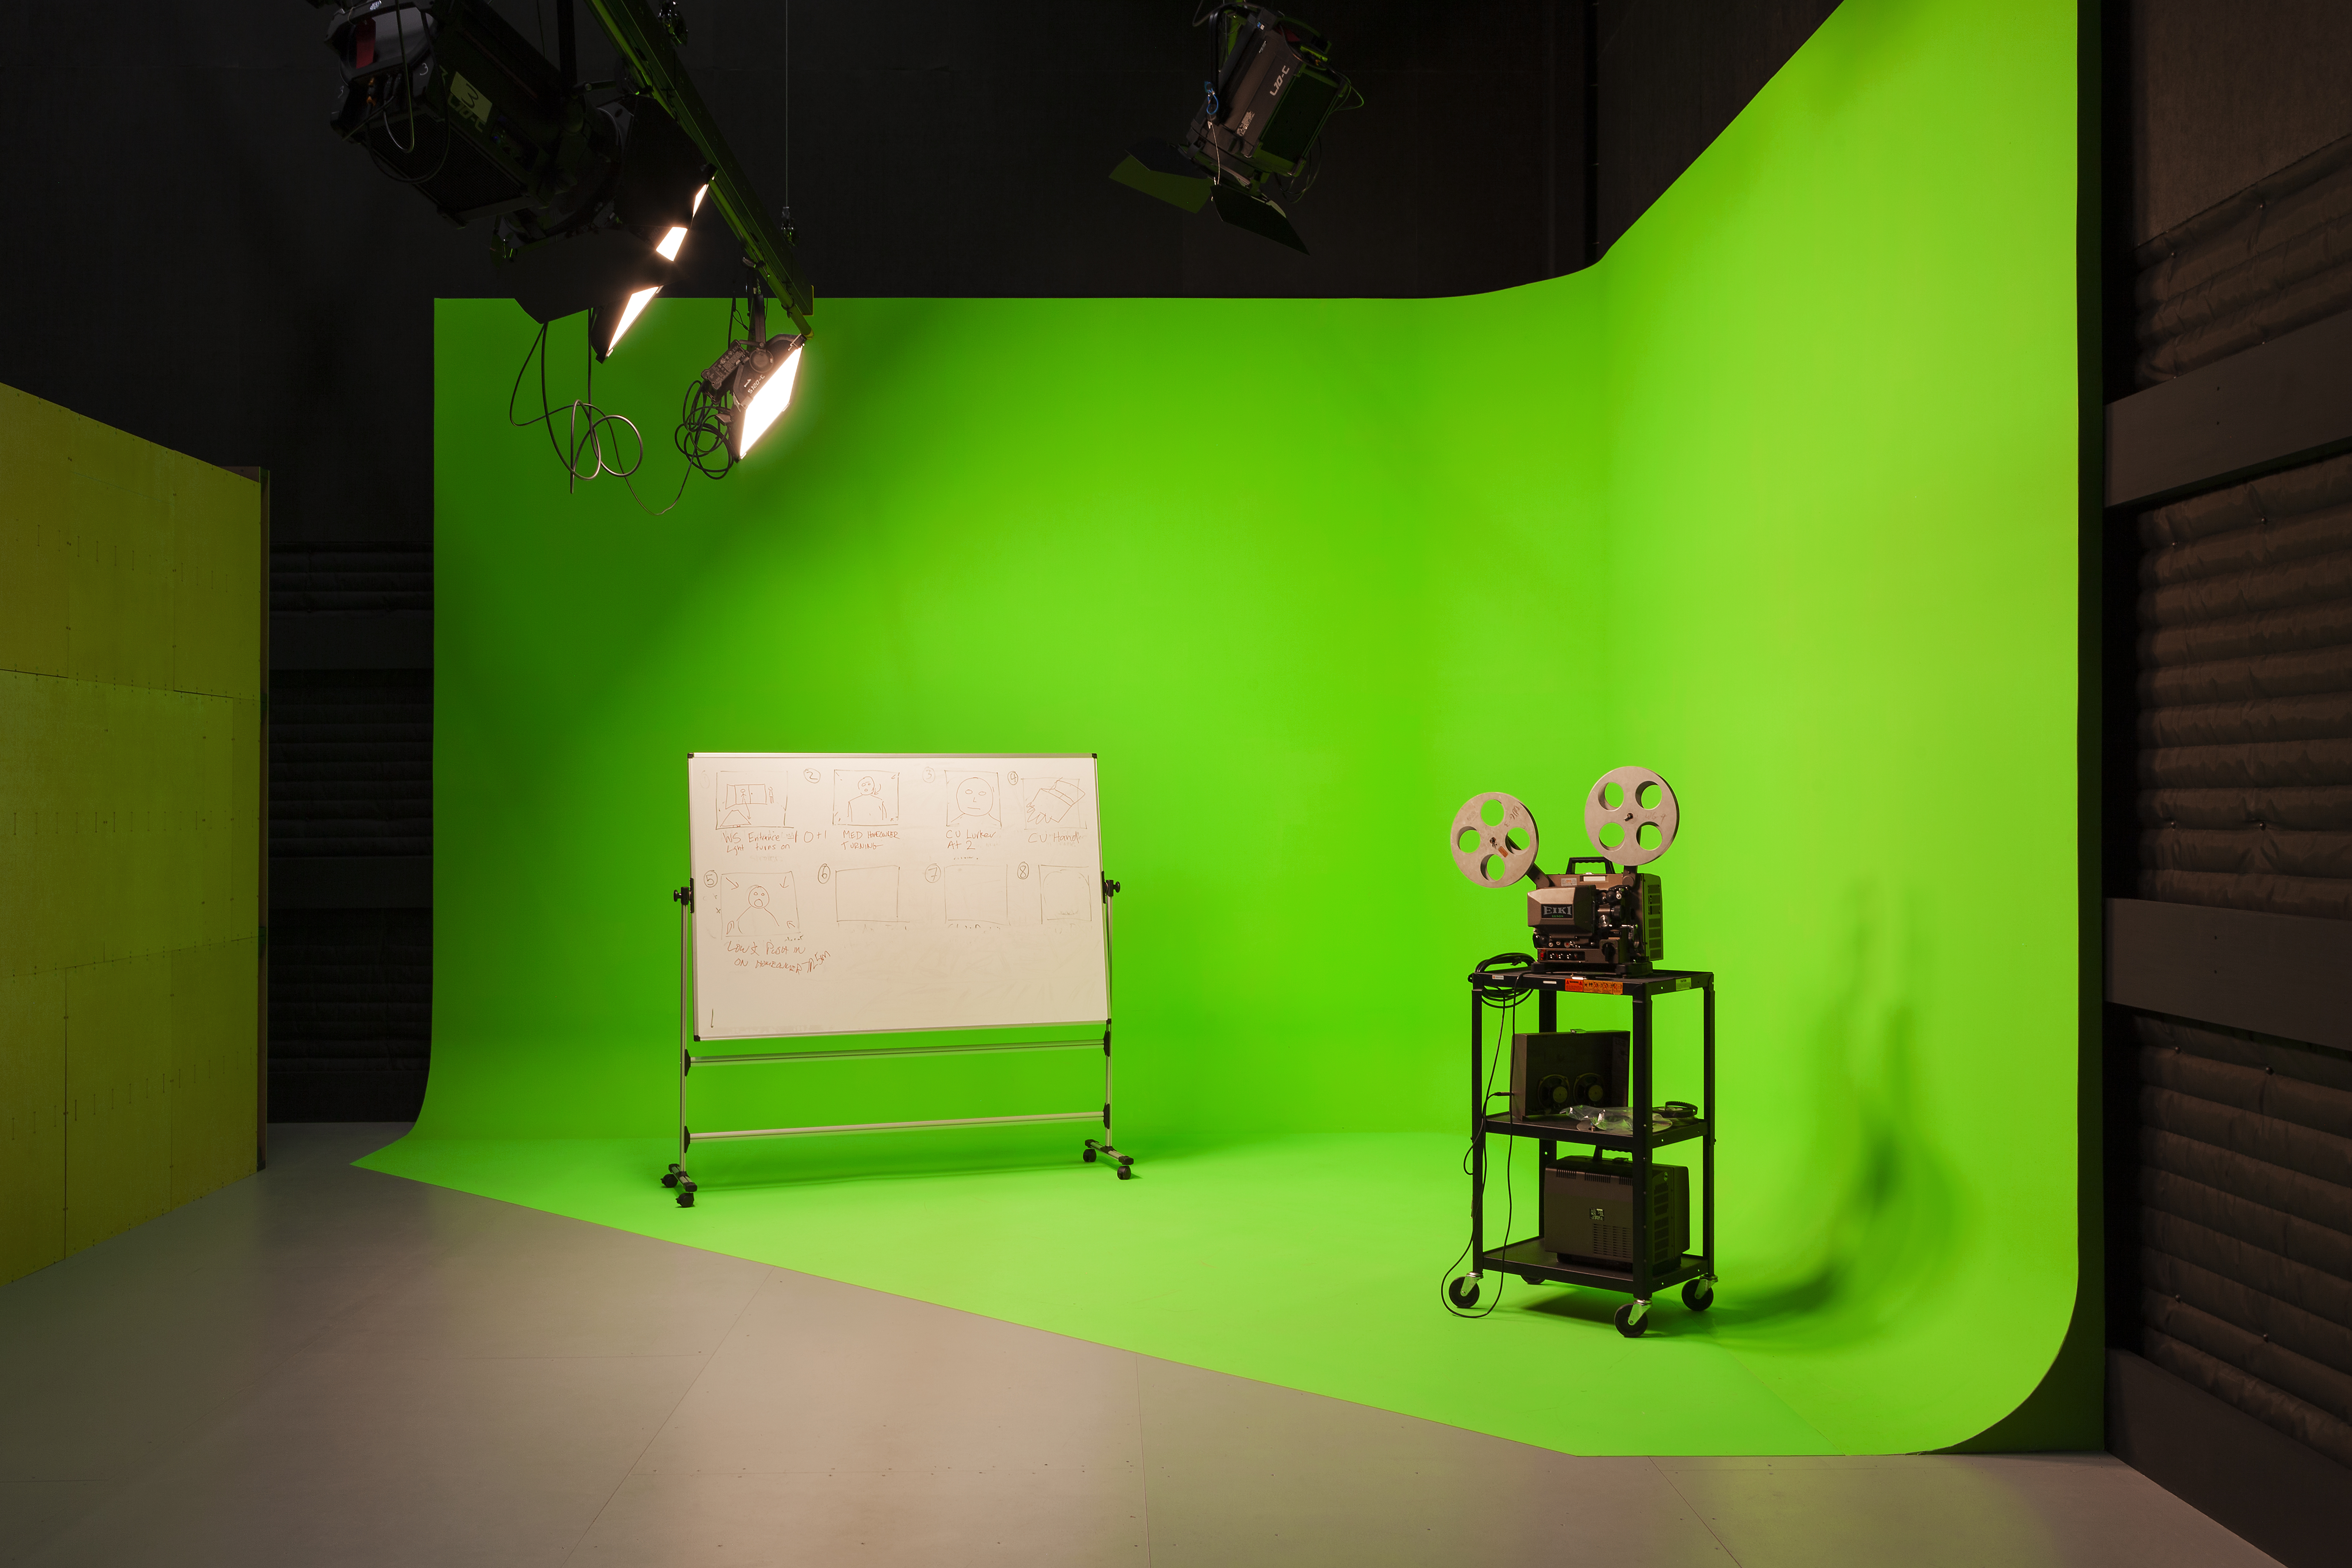 A white board and projector stand sitting on a green screen in a studio.